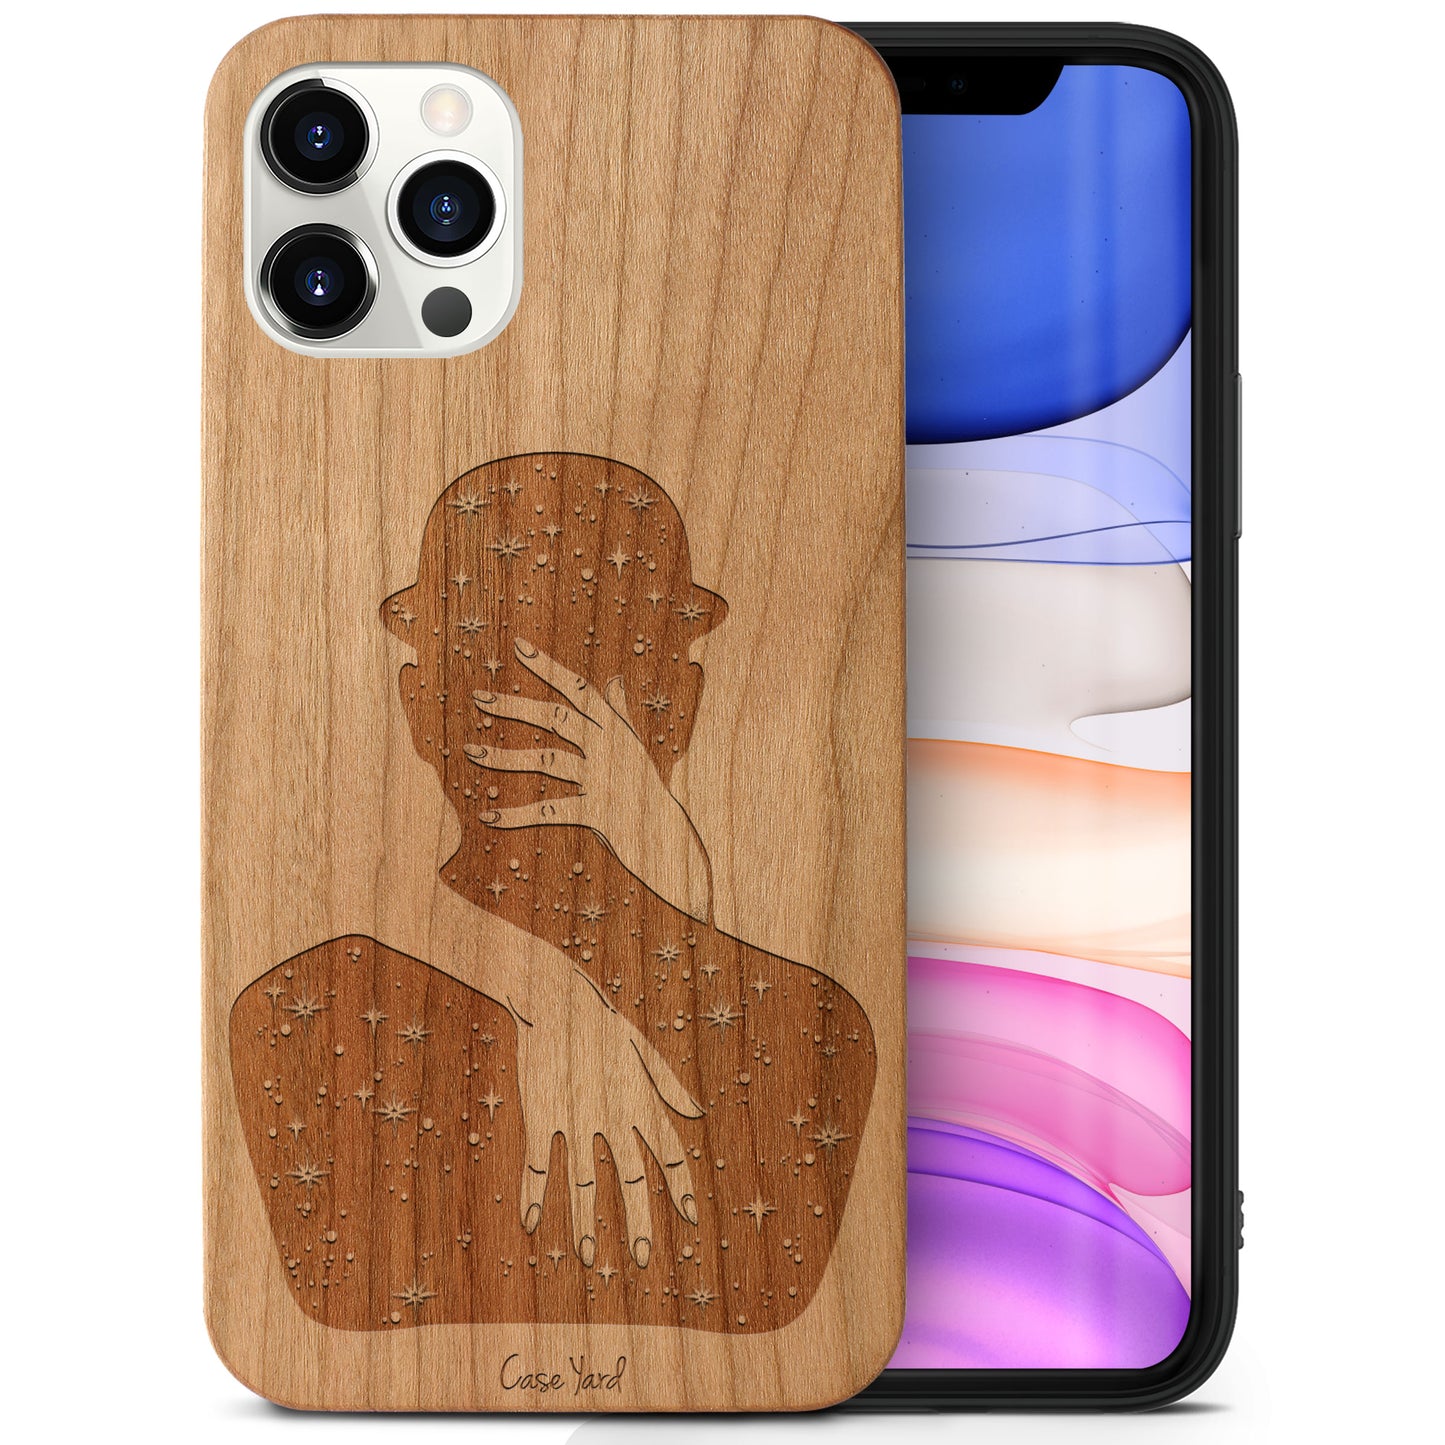 Wooden Cell Phone Case Cover, Laser Engraved case for iPhone & Samsung phone Mystic Lady Design